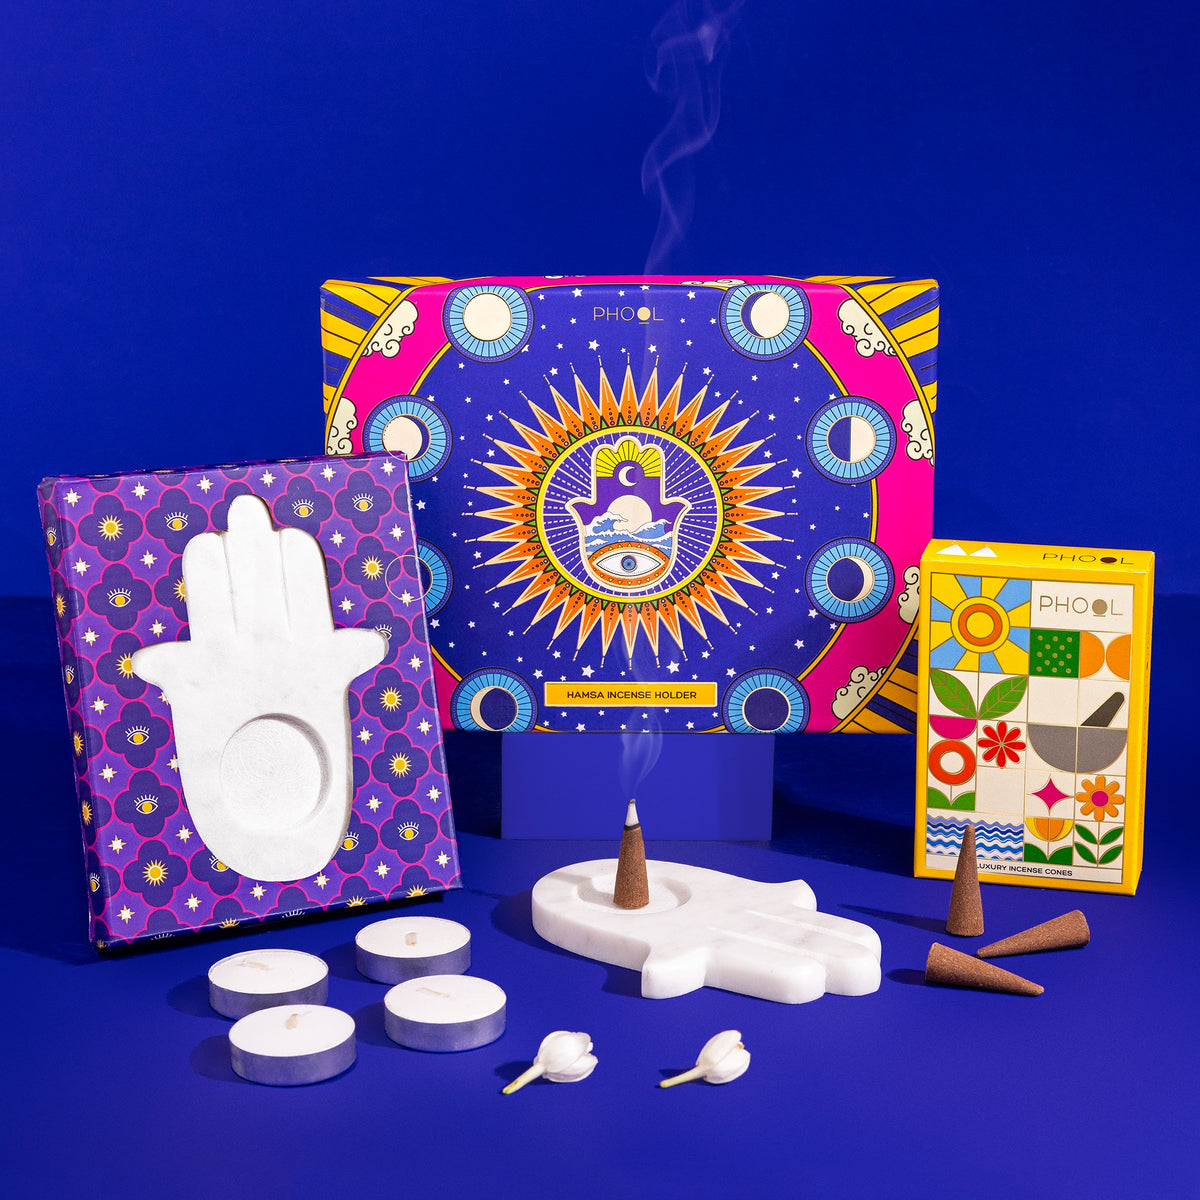 The Phool Marble Hamsa Gift Box depicts the auspicious concepts of Hamsa  and Evil Eye on the hand-illustrated packaging and consists of b... |  Instagram